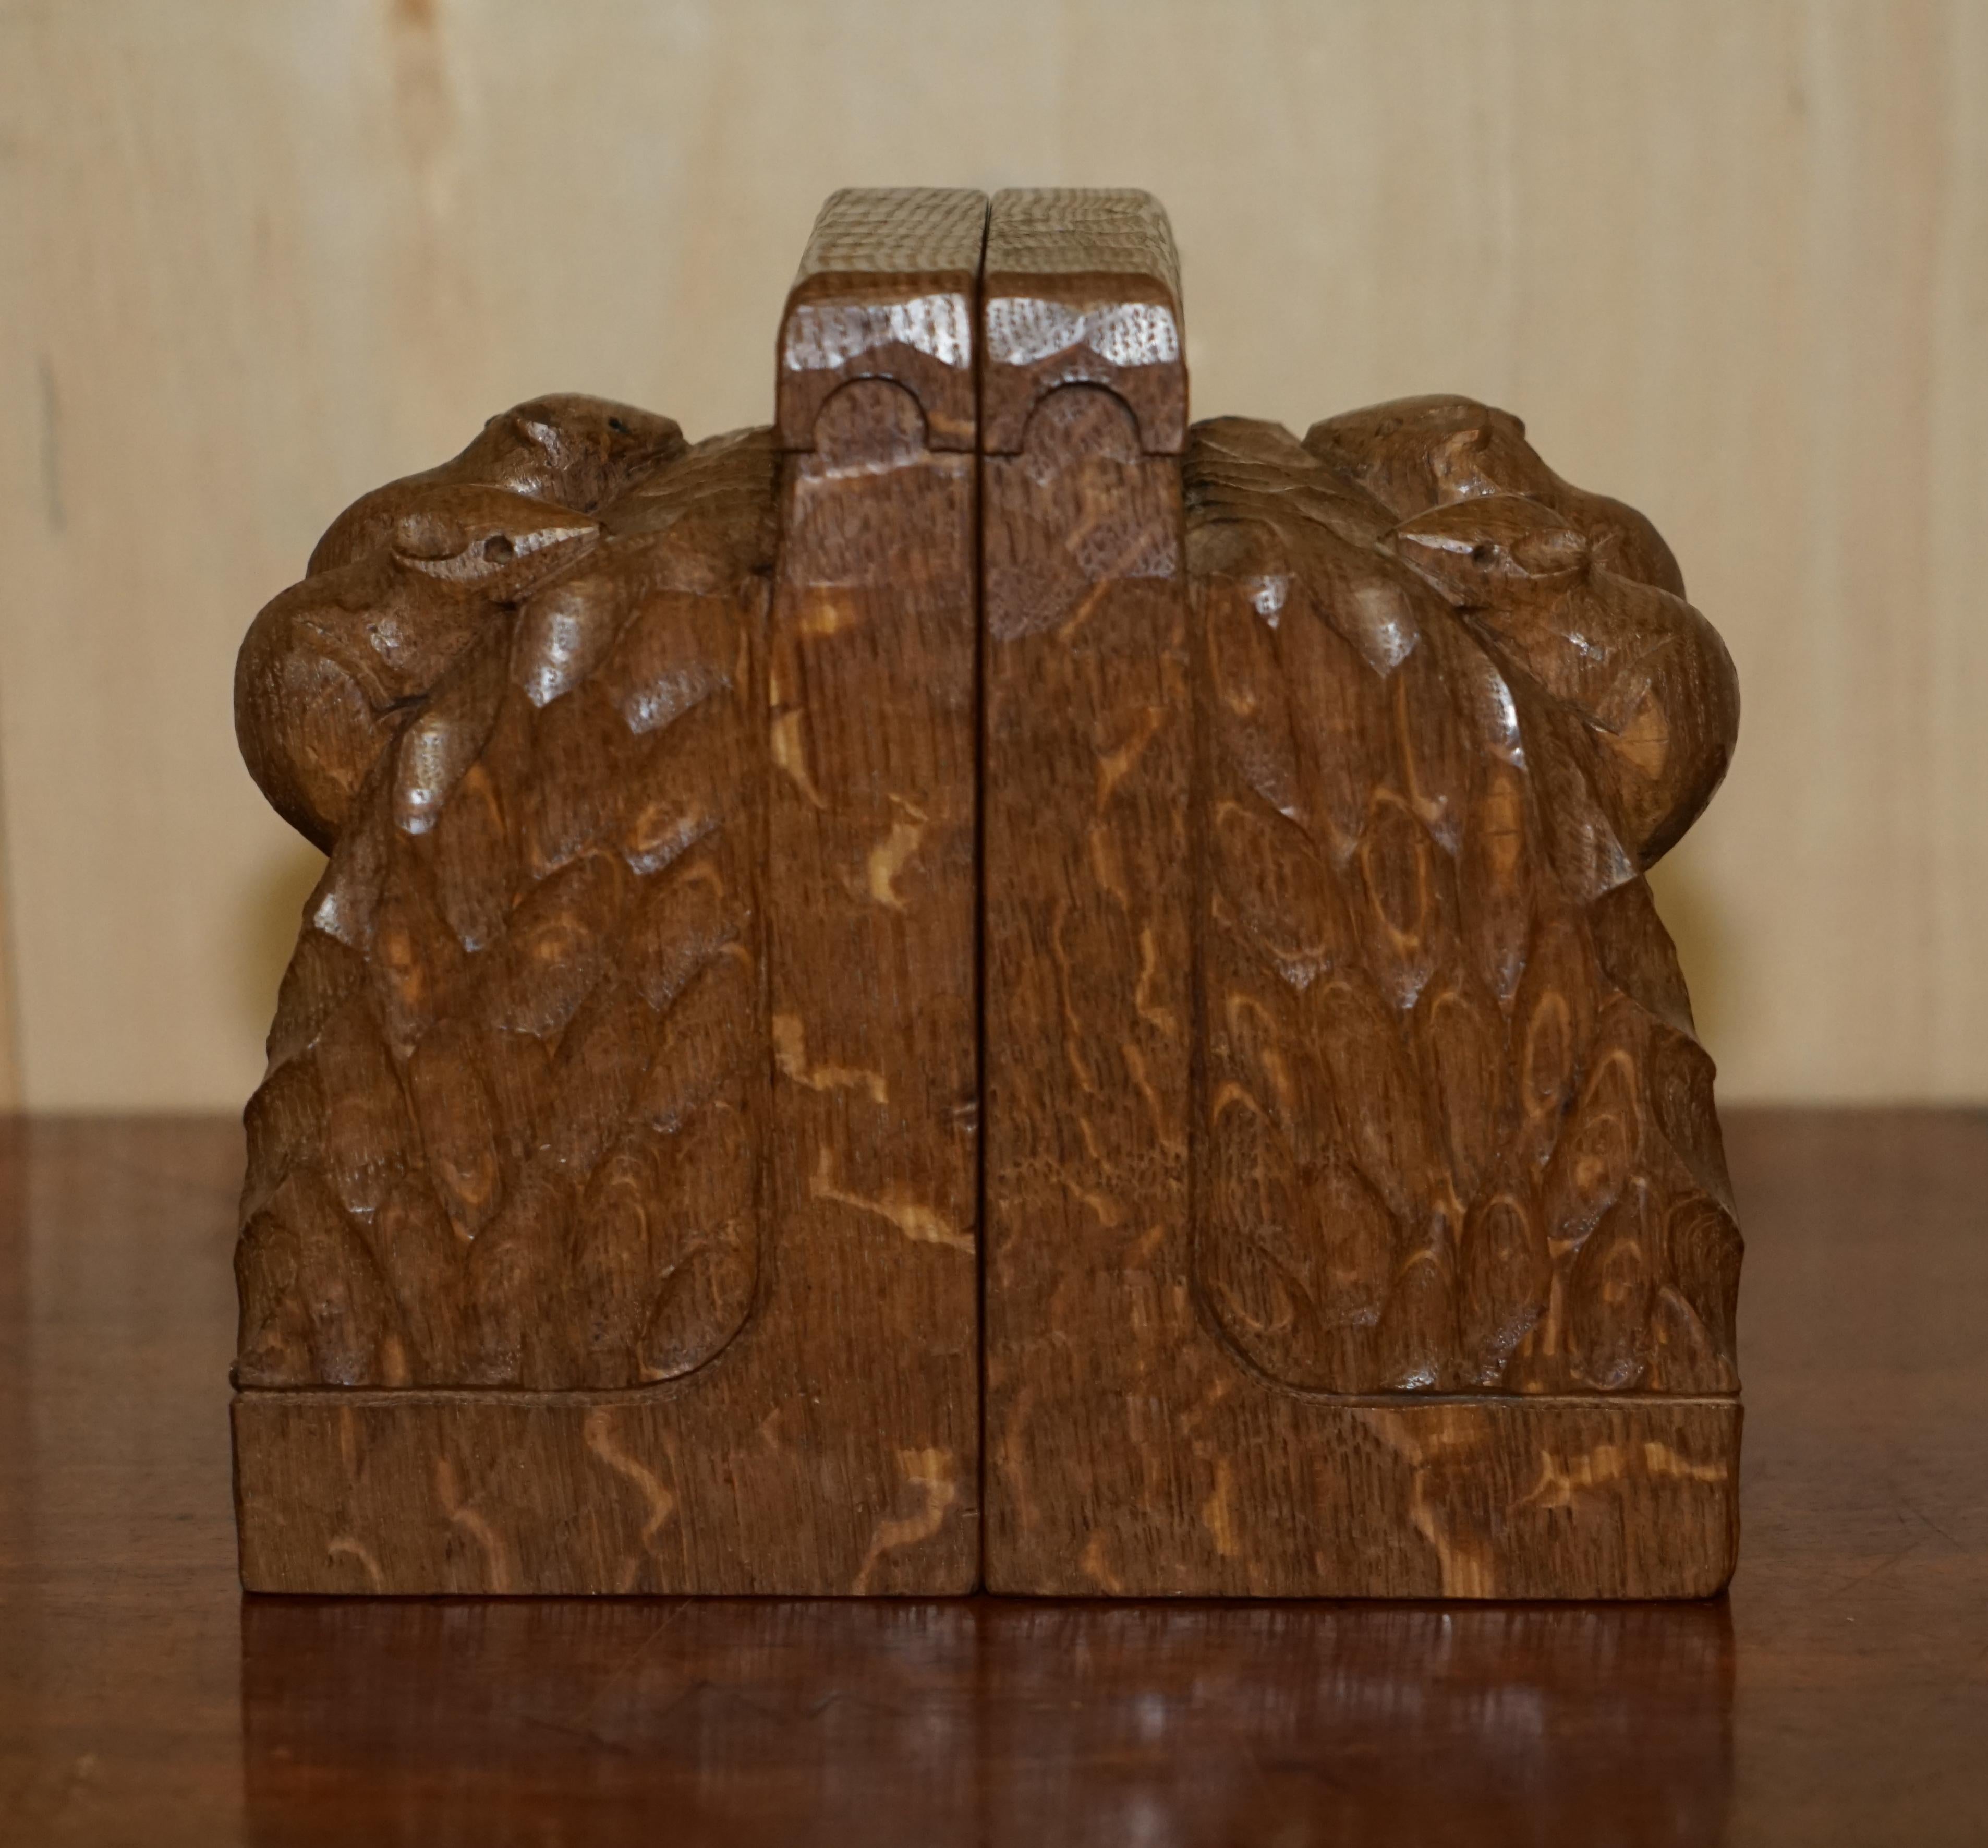 Royal House Antiques

Royal House Antiques is delighted to offer for sale this extremely collectable pair of vintage Robert Mouseman Thompson three mice bookends 

Please note the delivery fee listed is just a guide, it covers within the M25